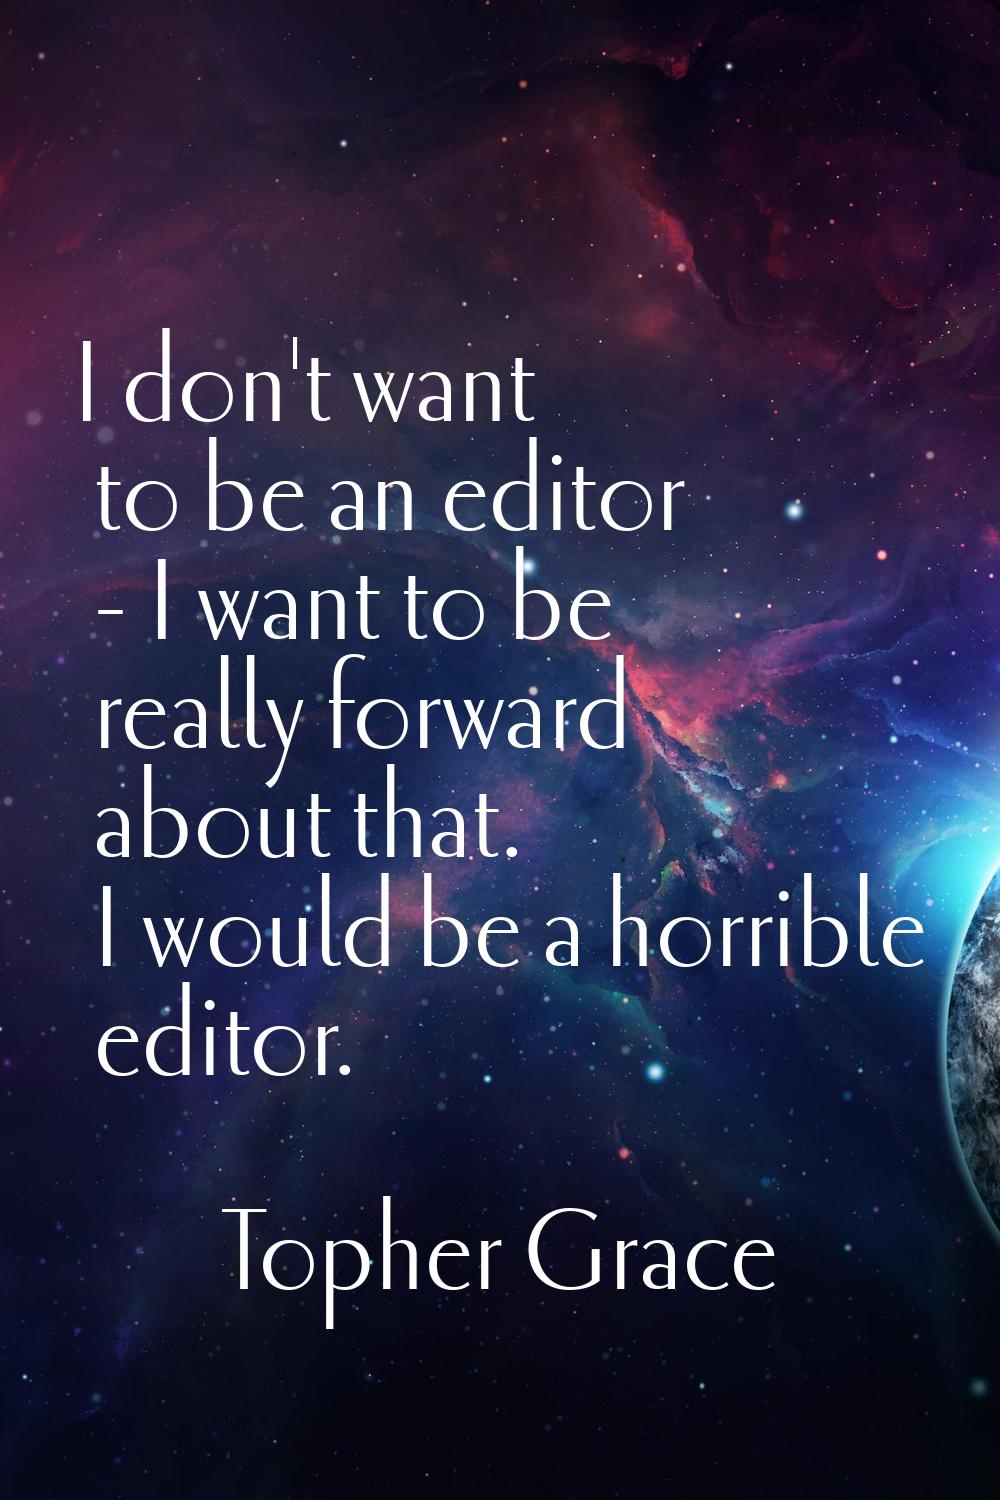 I don't want to be an editor - I want to be really forward about that. I would be a horrible editor